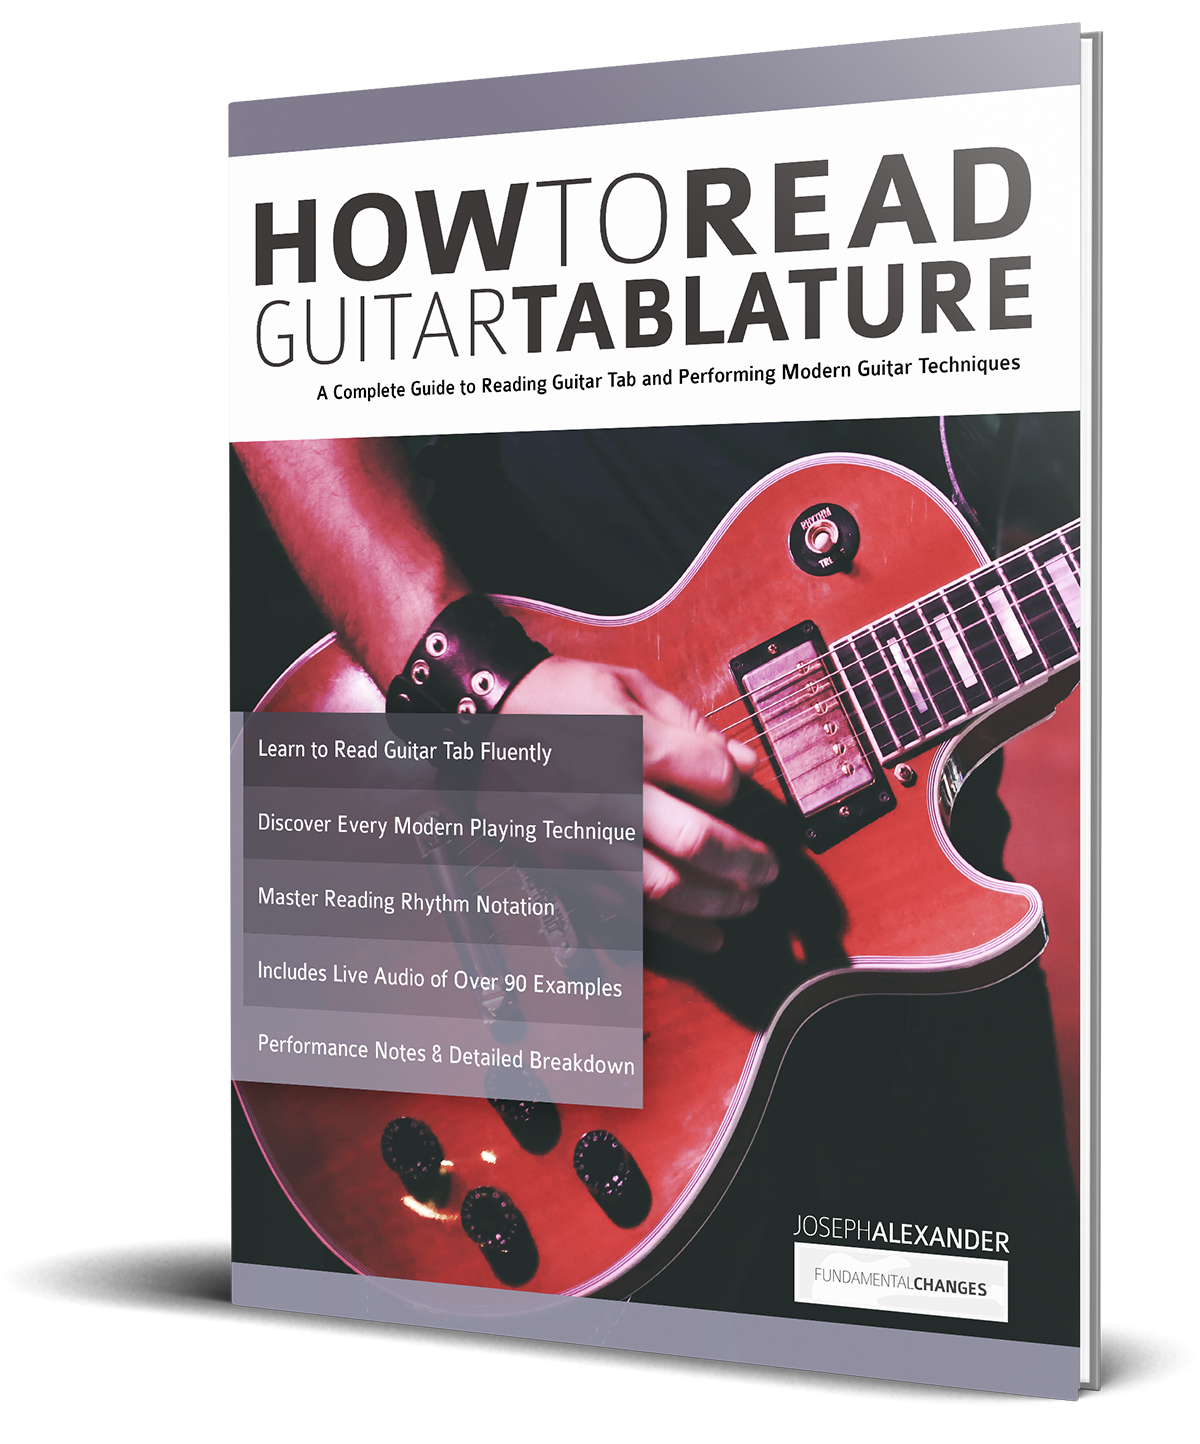 How to read guitar tab - Fundamental Changes Music Book Publishing